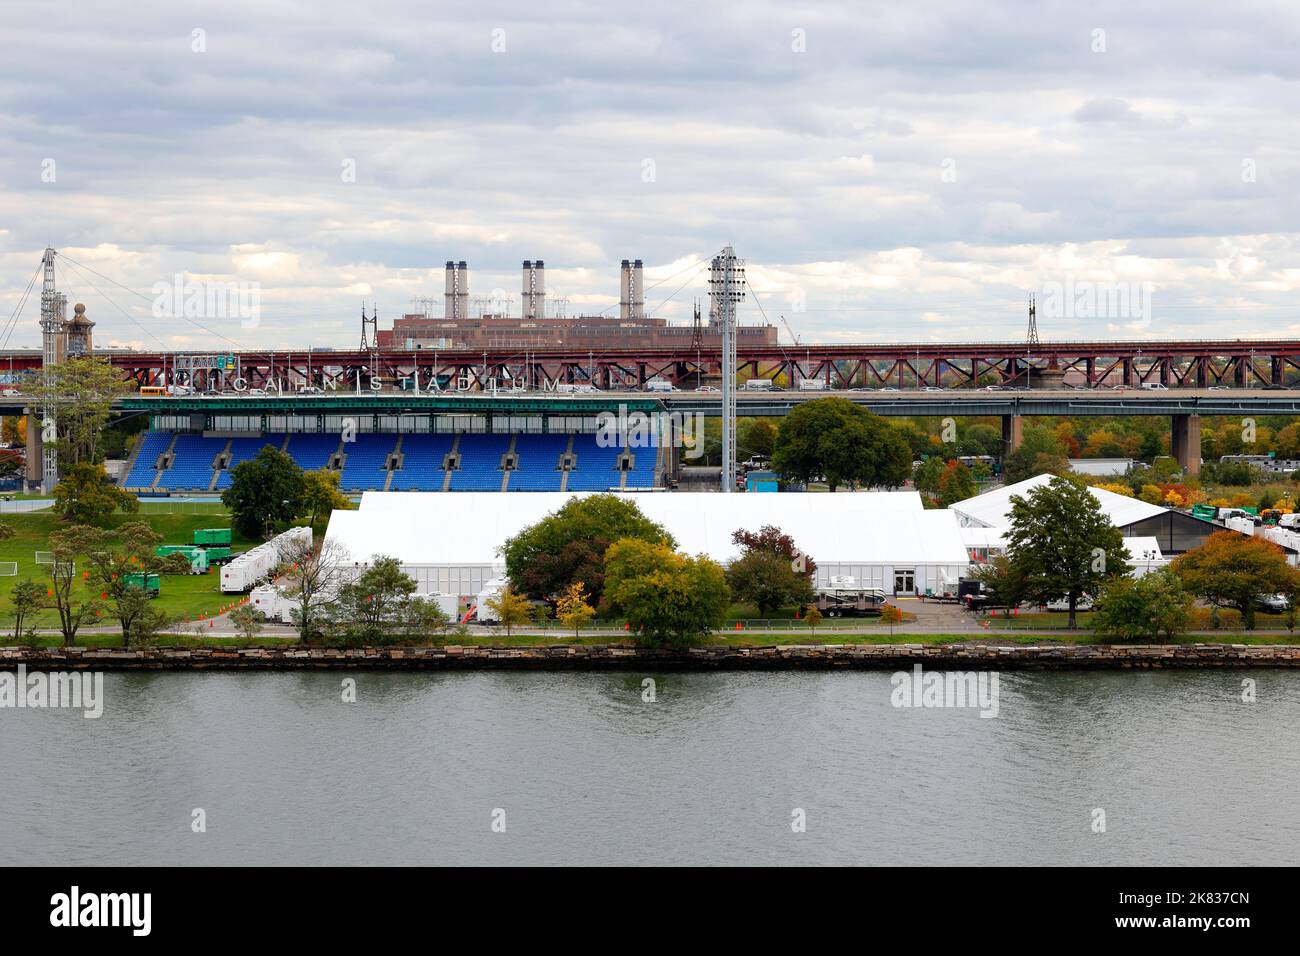 Randall's Island Humanitarian Emergency Response and Relief Center, New York City. A 1100-bed temporary shelter for migrants, or asylum seekers. Stock Photo